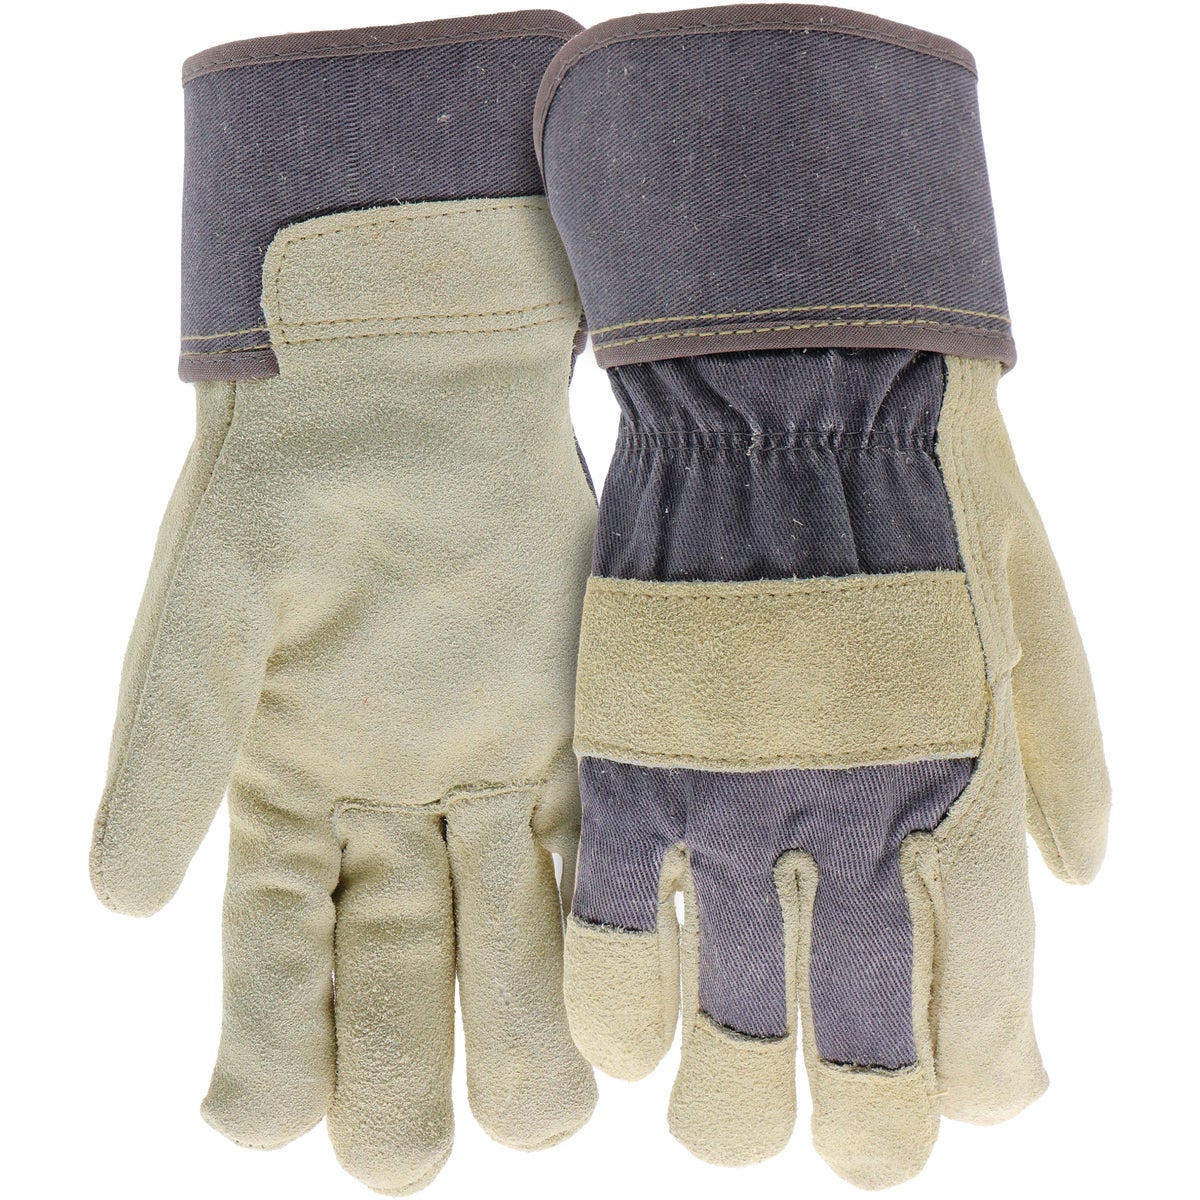 West Chester Protective Gear Dirty Work Women's Small Leather Work Glove 